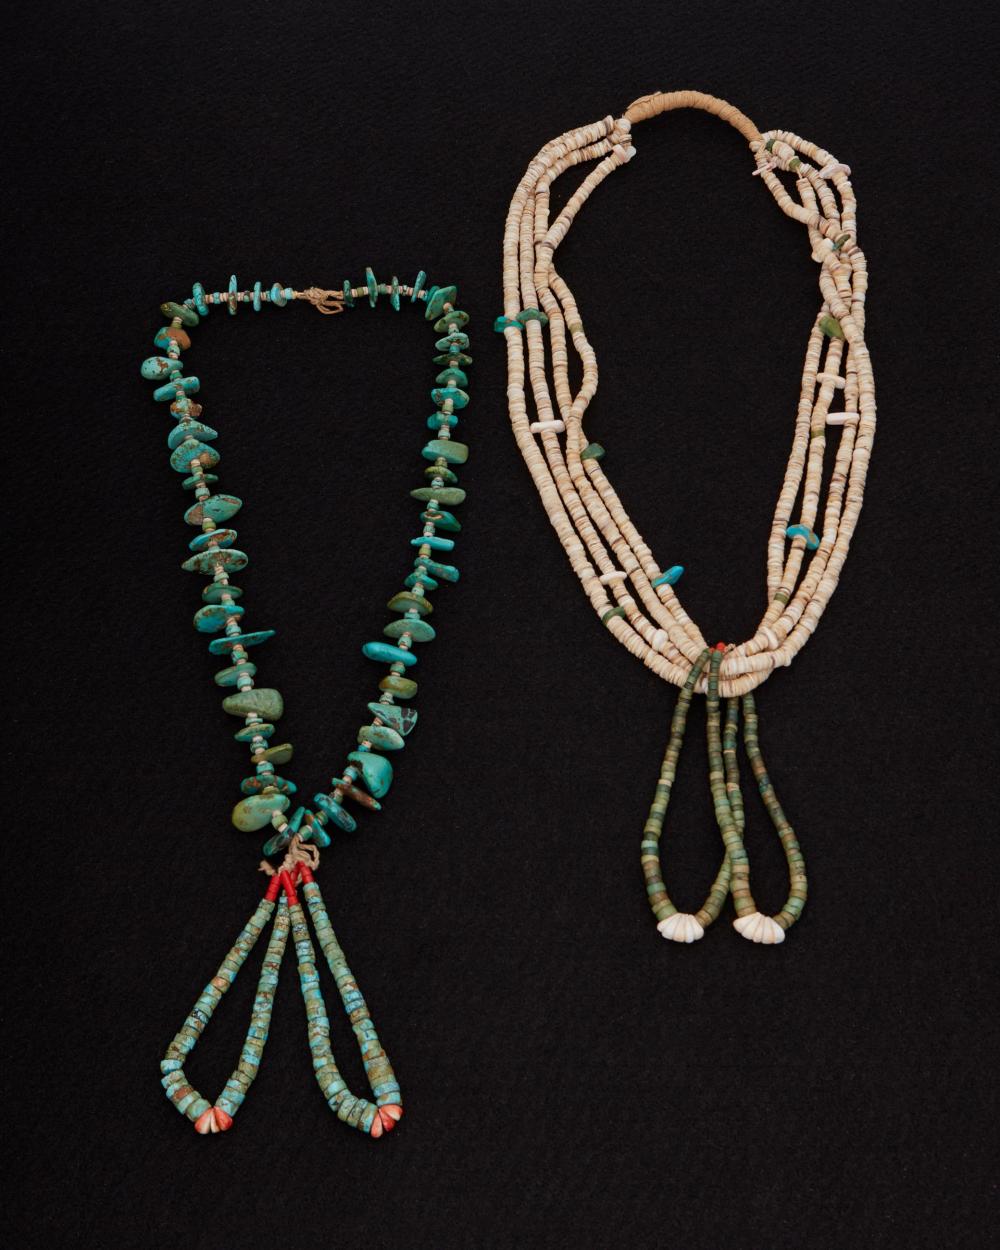 TWO PUEBLO NECKLACES WITH ATTACHED 3446be